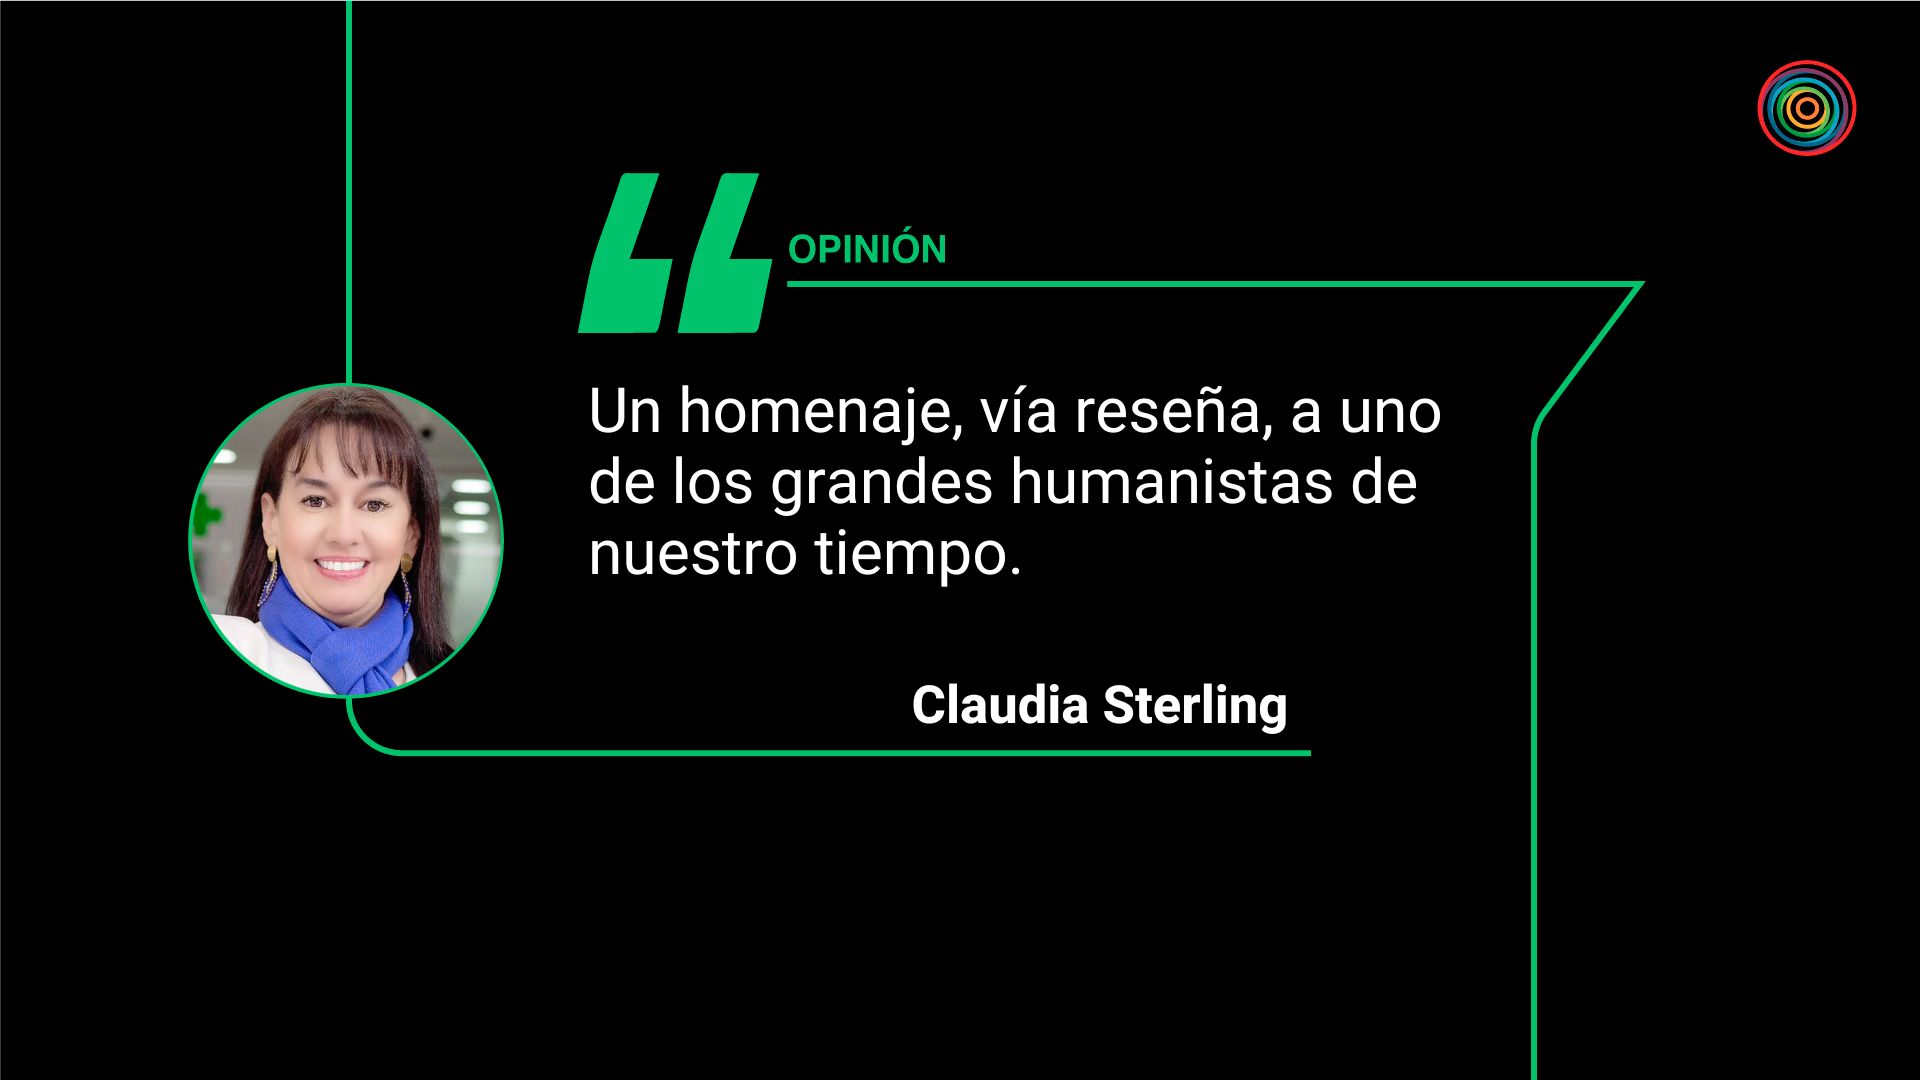 Claudia Sterling